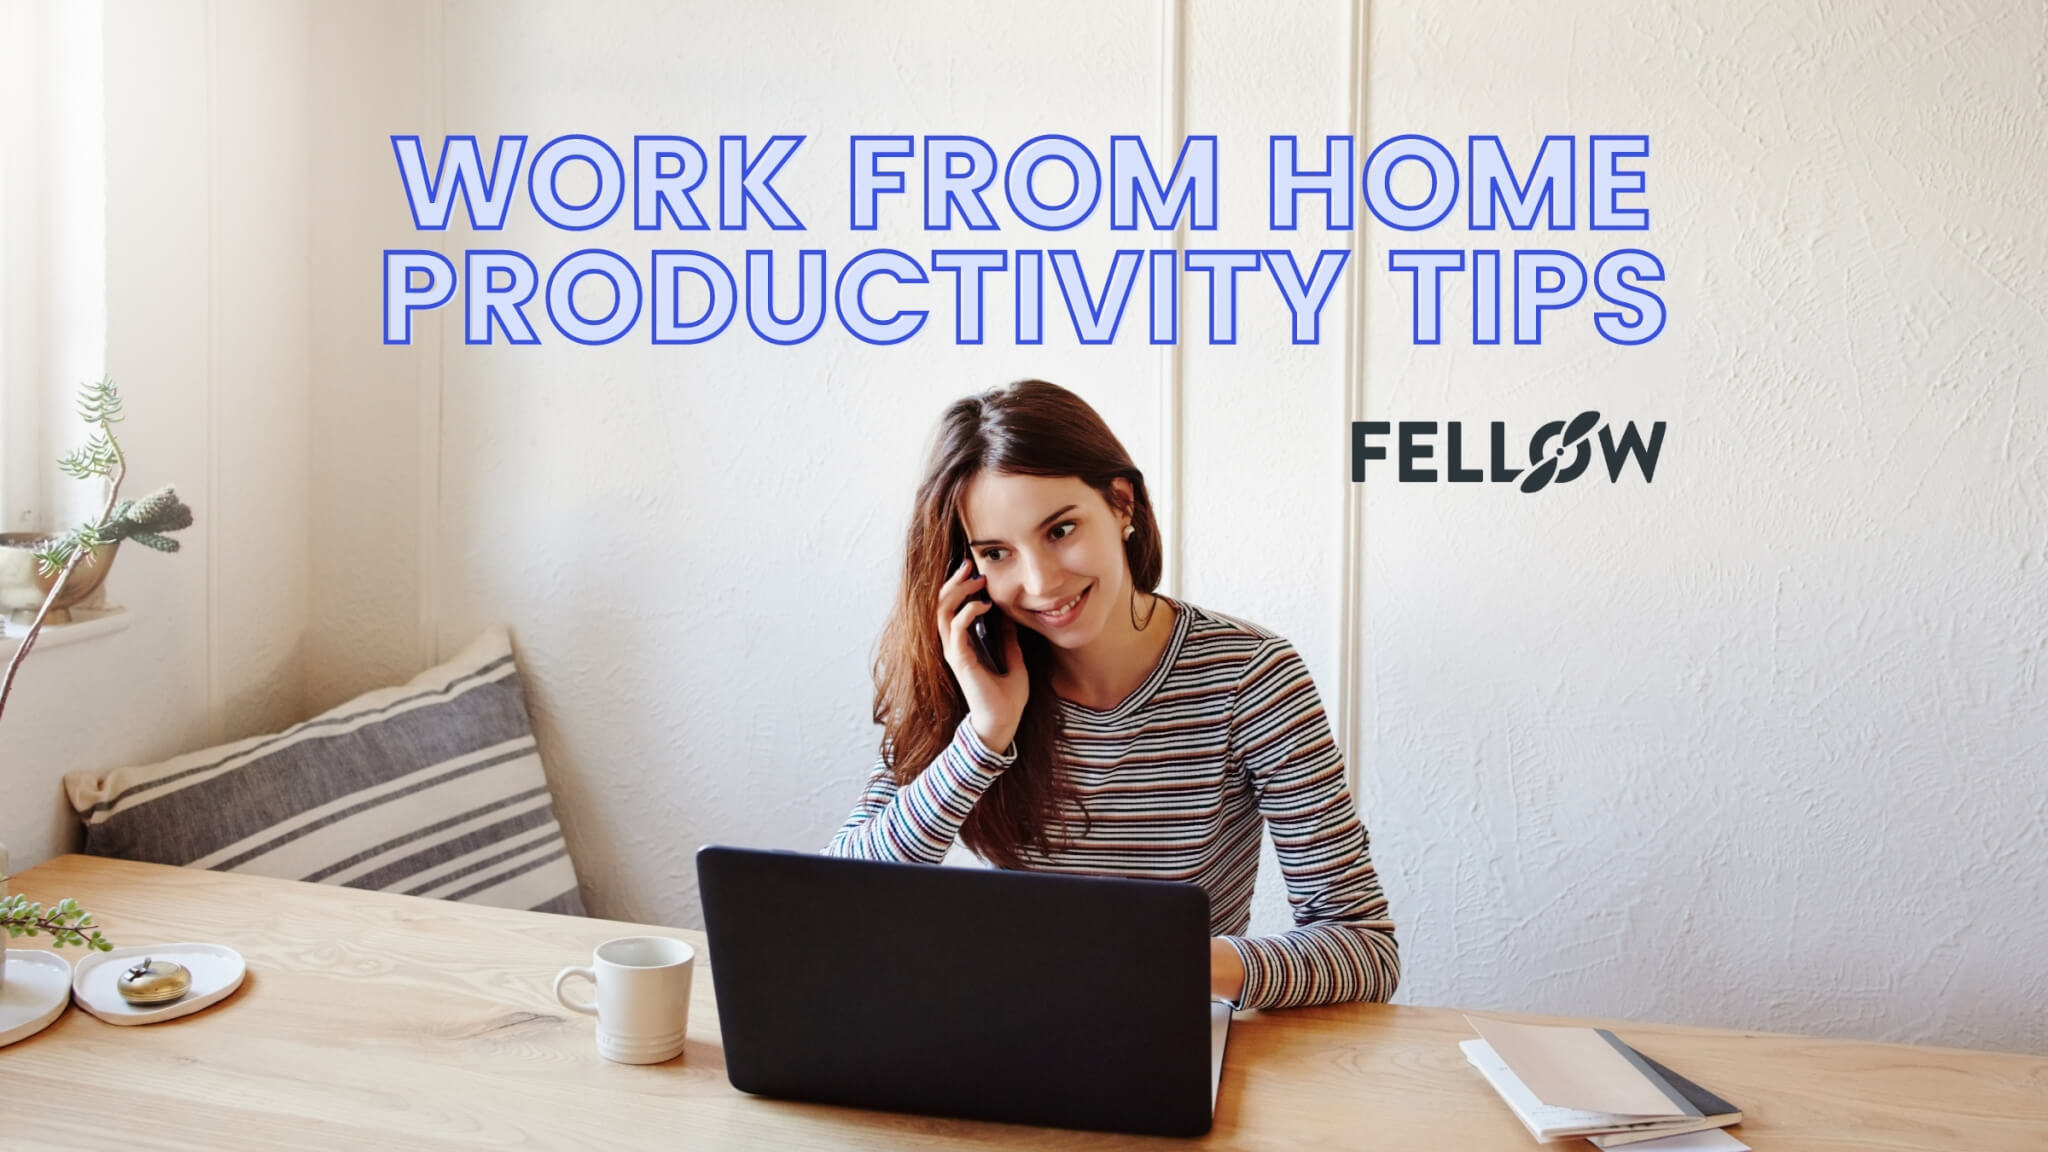 7 Tips for Maximizing Productivity while Working from Home - Establishing a consistent daily routine